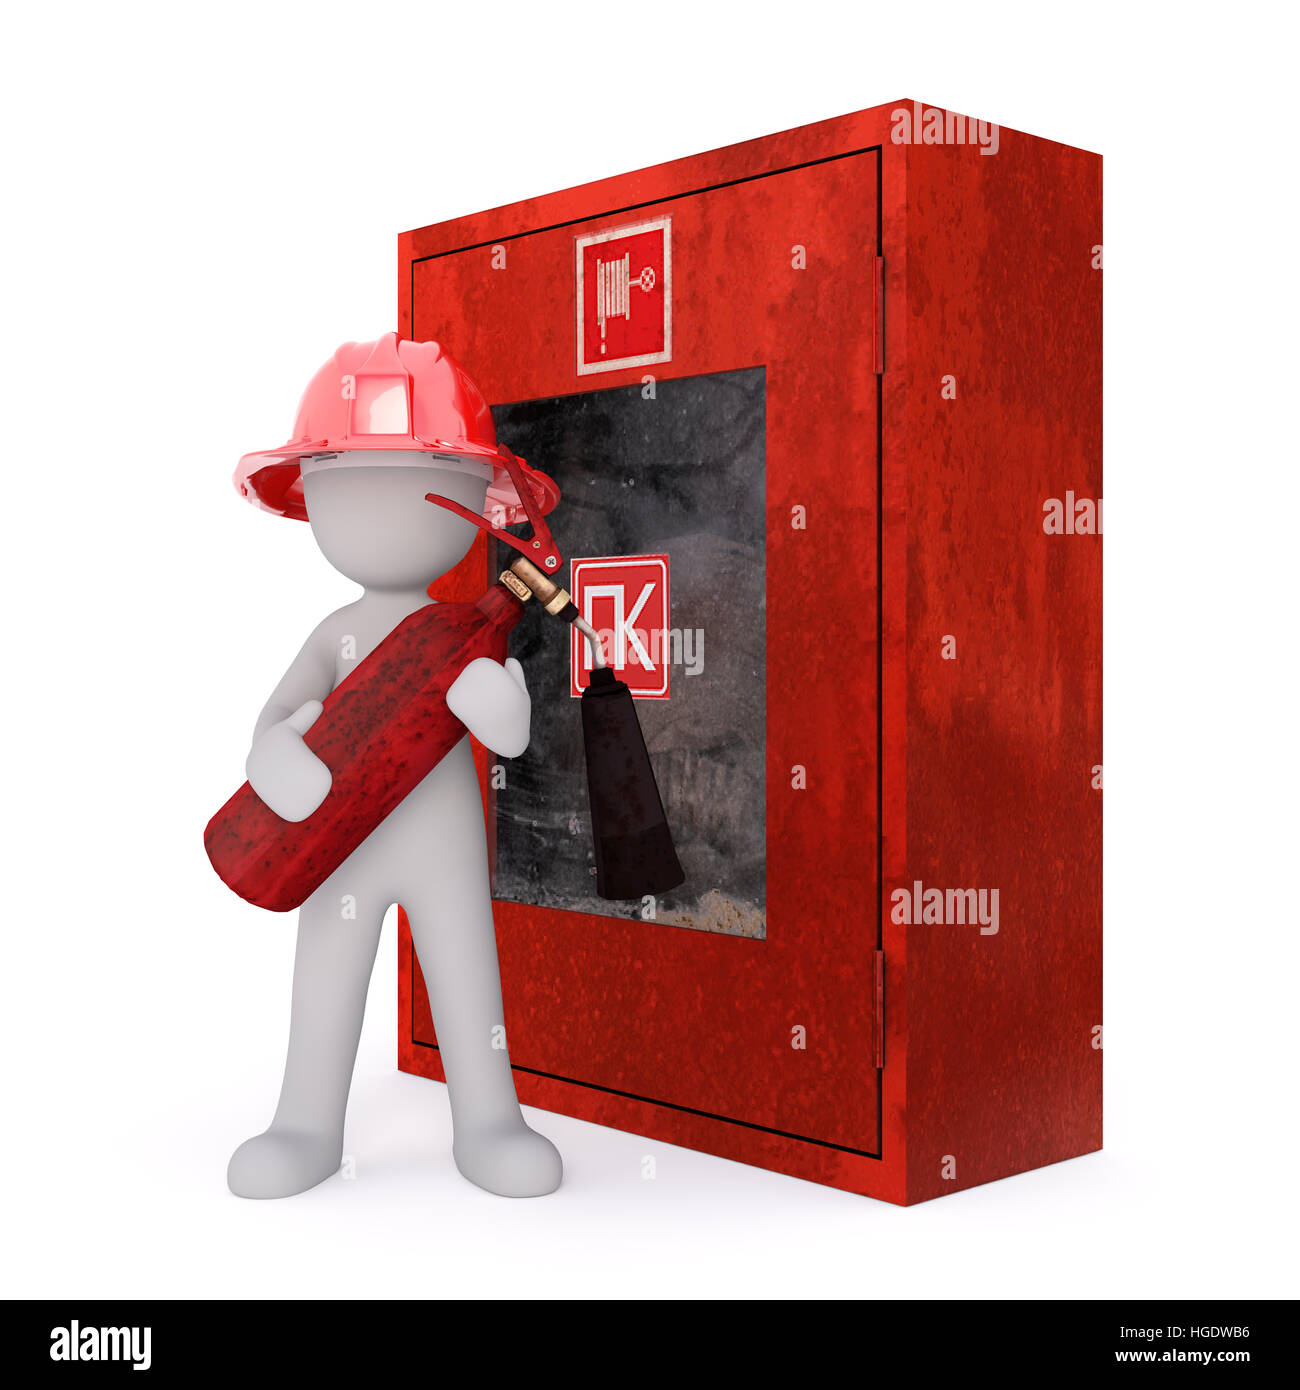 3d Rendering of Cartoon Figure Wearing Helmet and Holding Fire Extinguisher Standing in front of Red Emergency Alarm Box on White Background Stock Photo